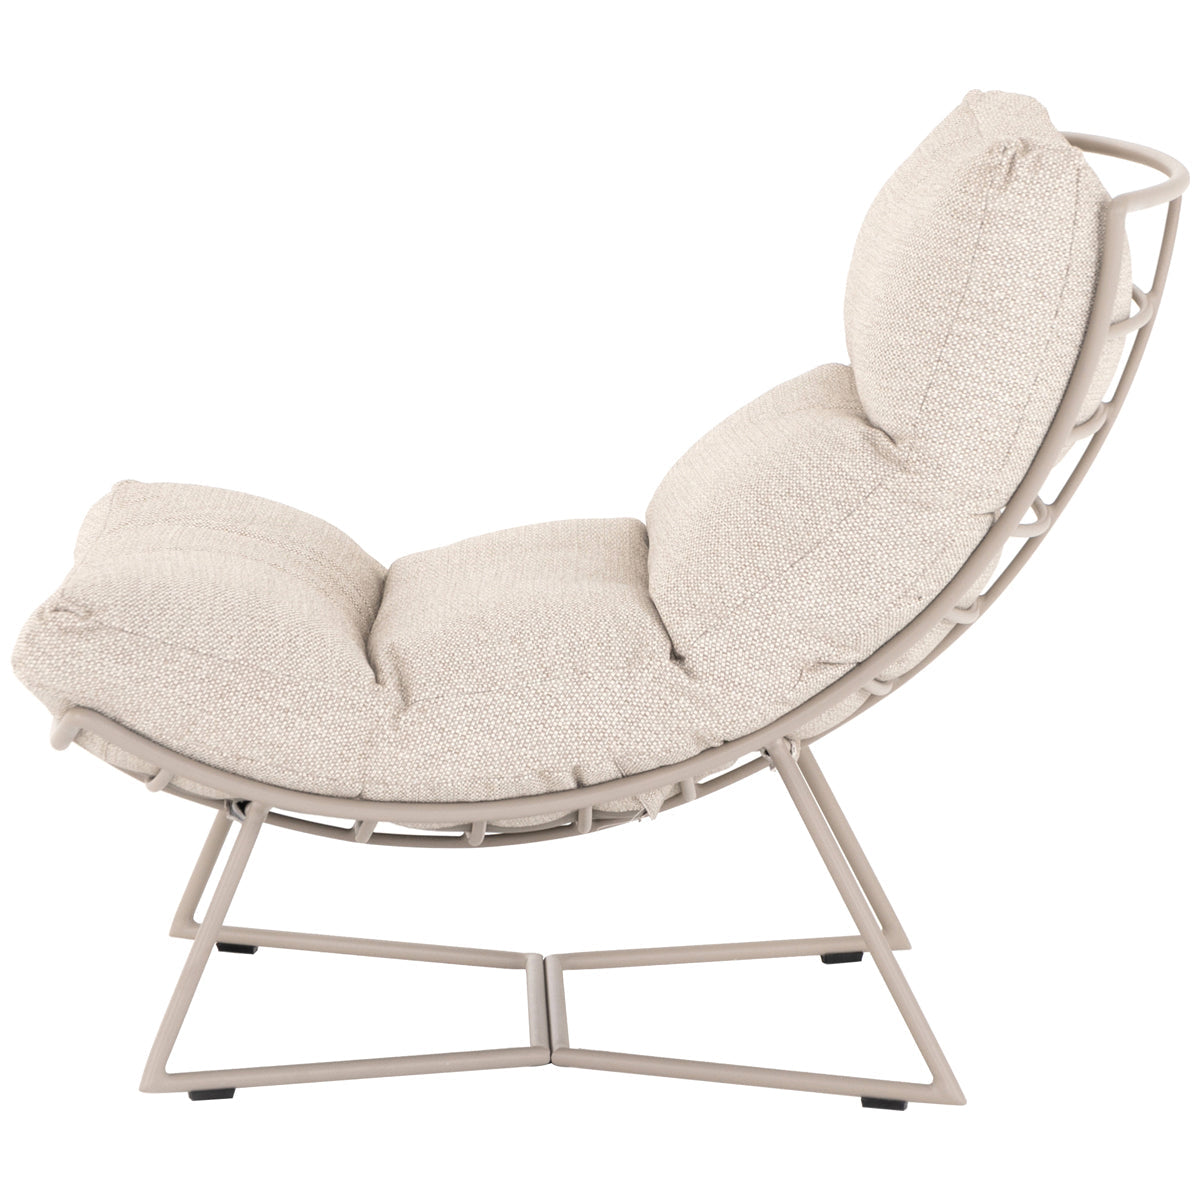 Four Hands Solano Bryant Outdoor Chair